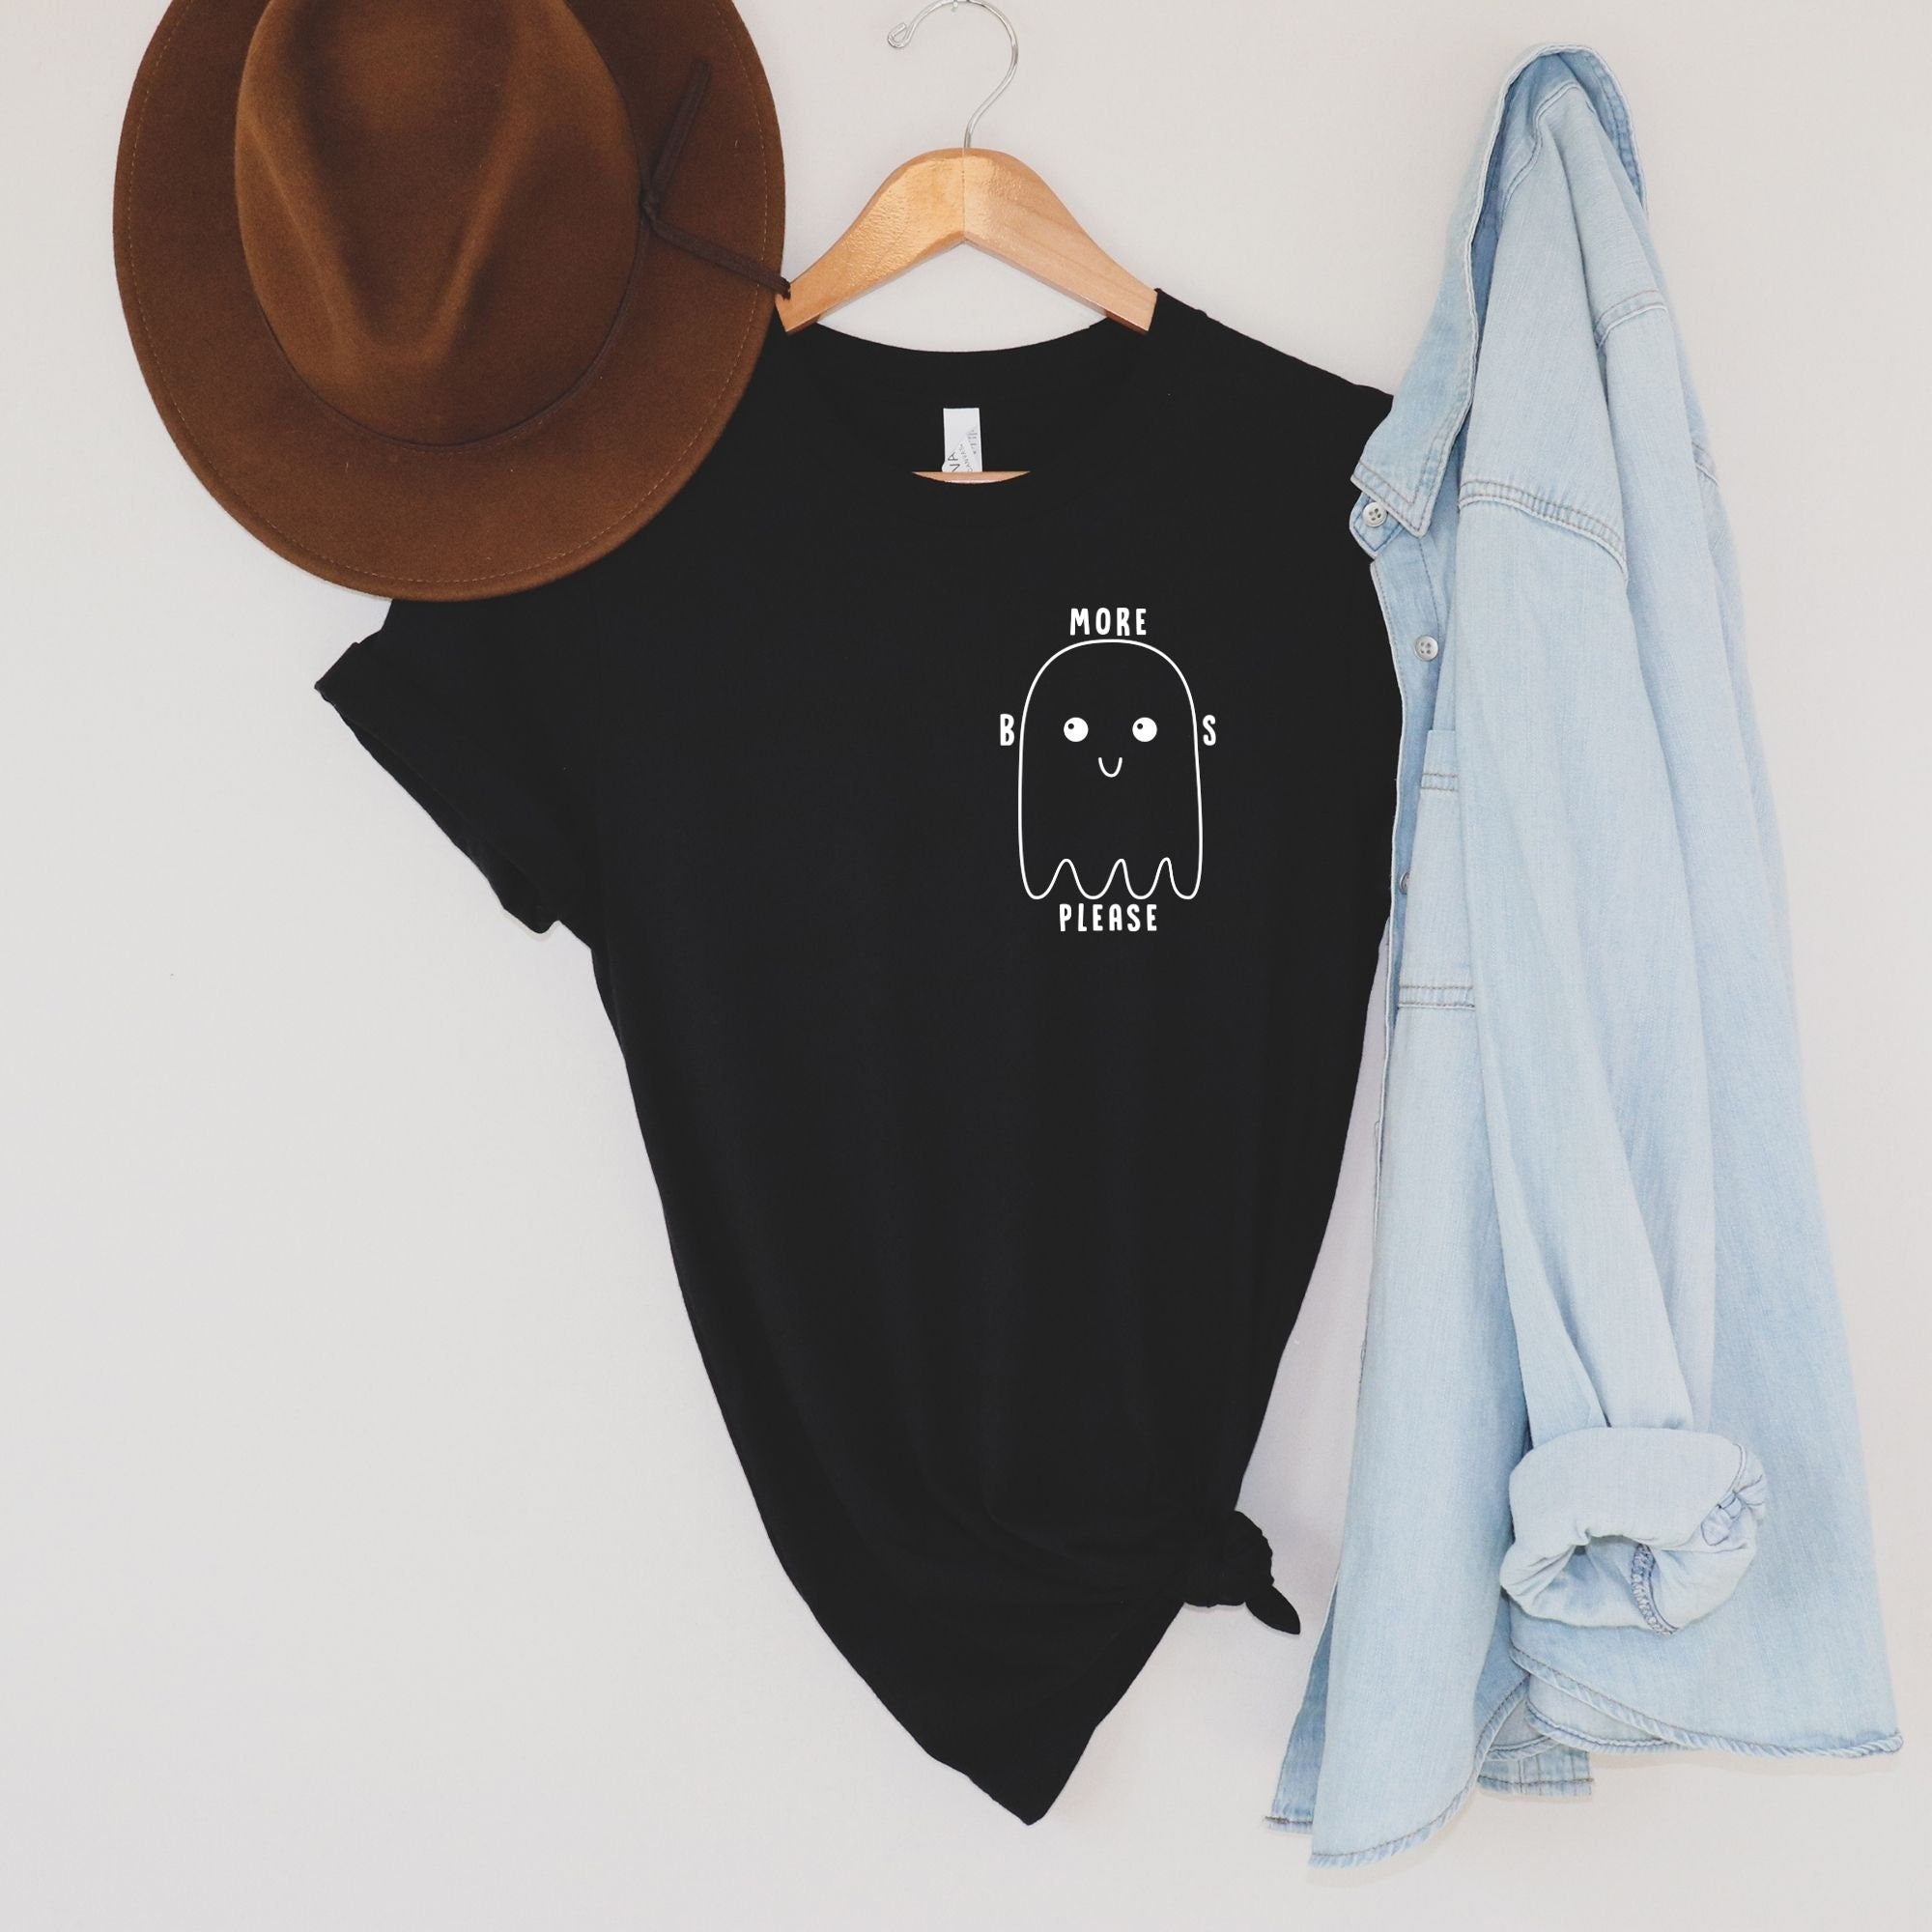 More BOO'S Please - Funny Ghost TShirt for Halloween *UNISEX FIT*-208 Tees Wholesale, Idaho